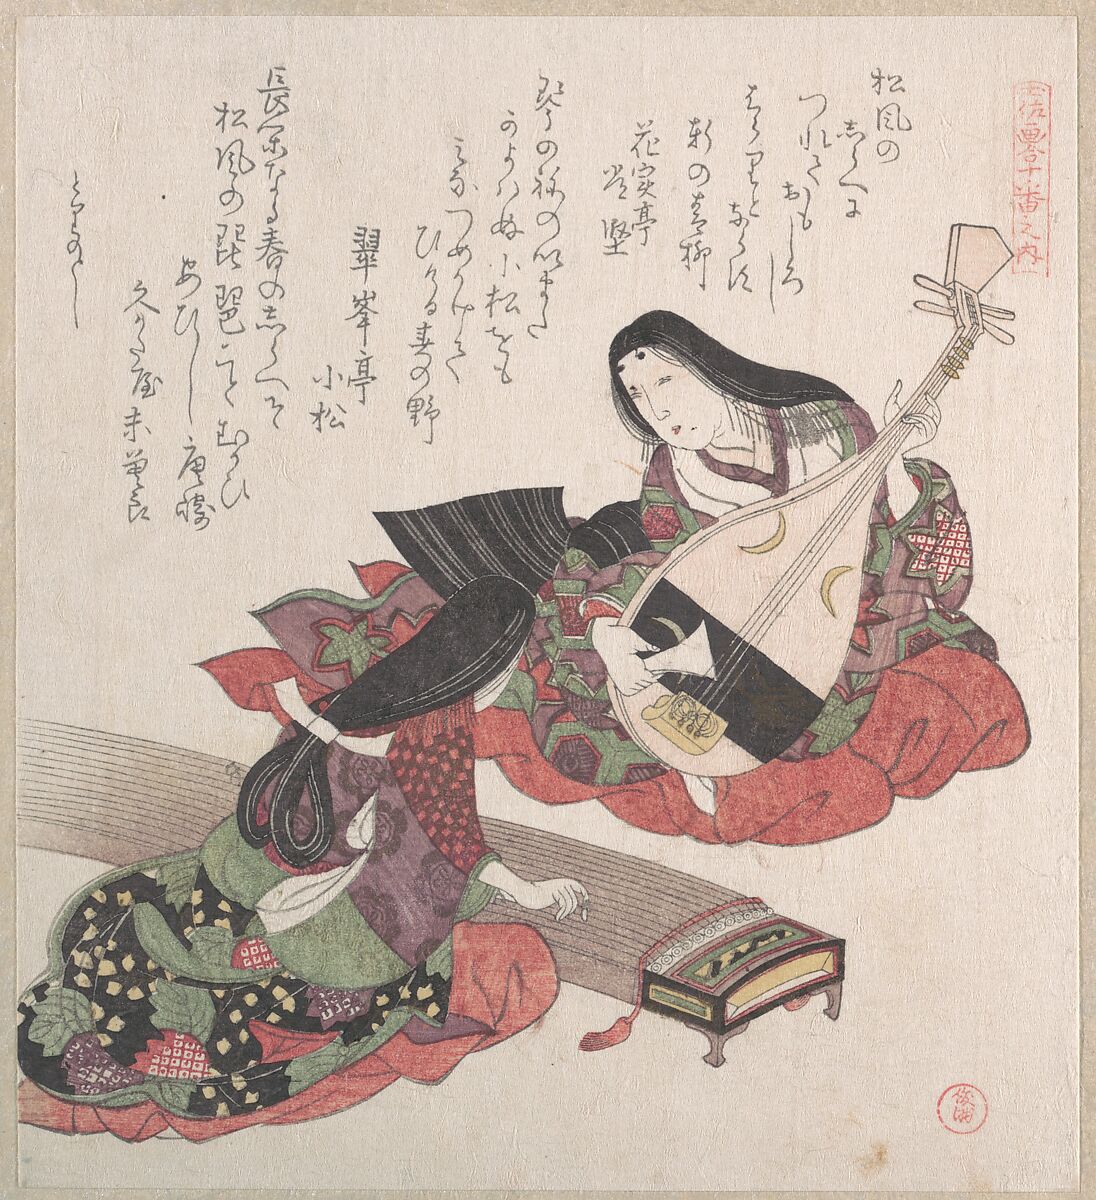 Two Ladies; One is Playing the Biwa (Japanese Lute) and the Other, the Koto (Japanese Harp), Kubo Shunman (Japanese, 1757–1820) (?), Part of an album of woodblock prints (surimono); ink and color on paper, Japan 